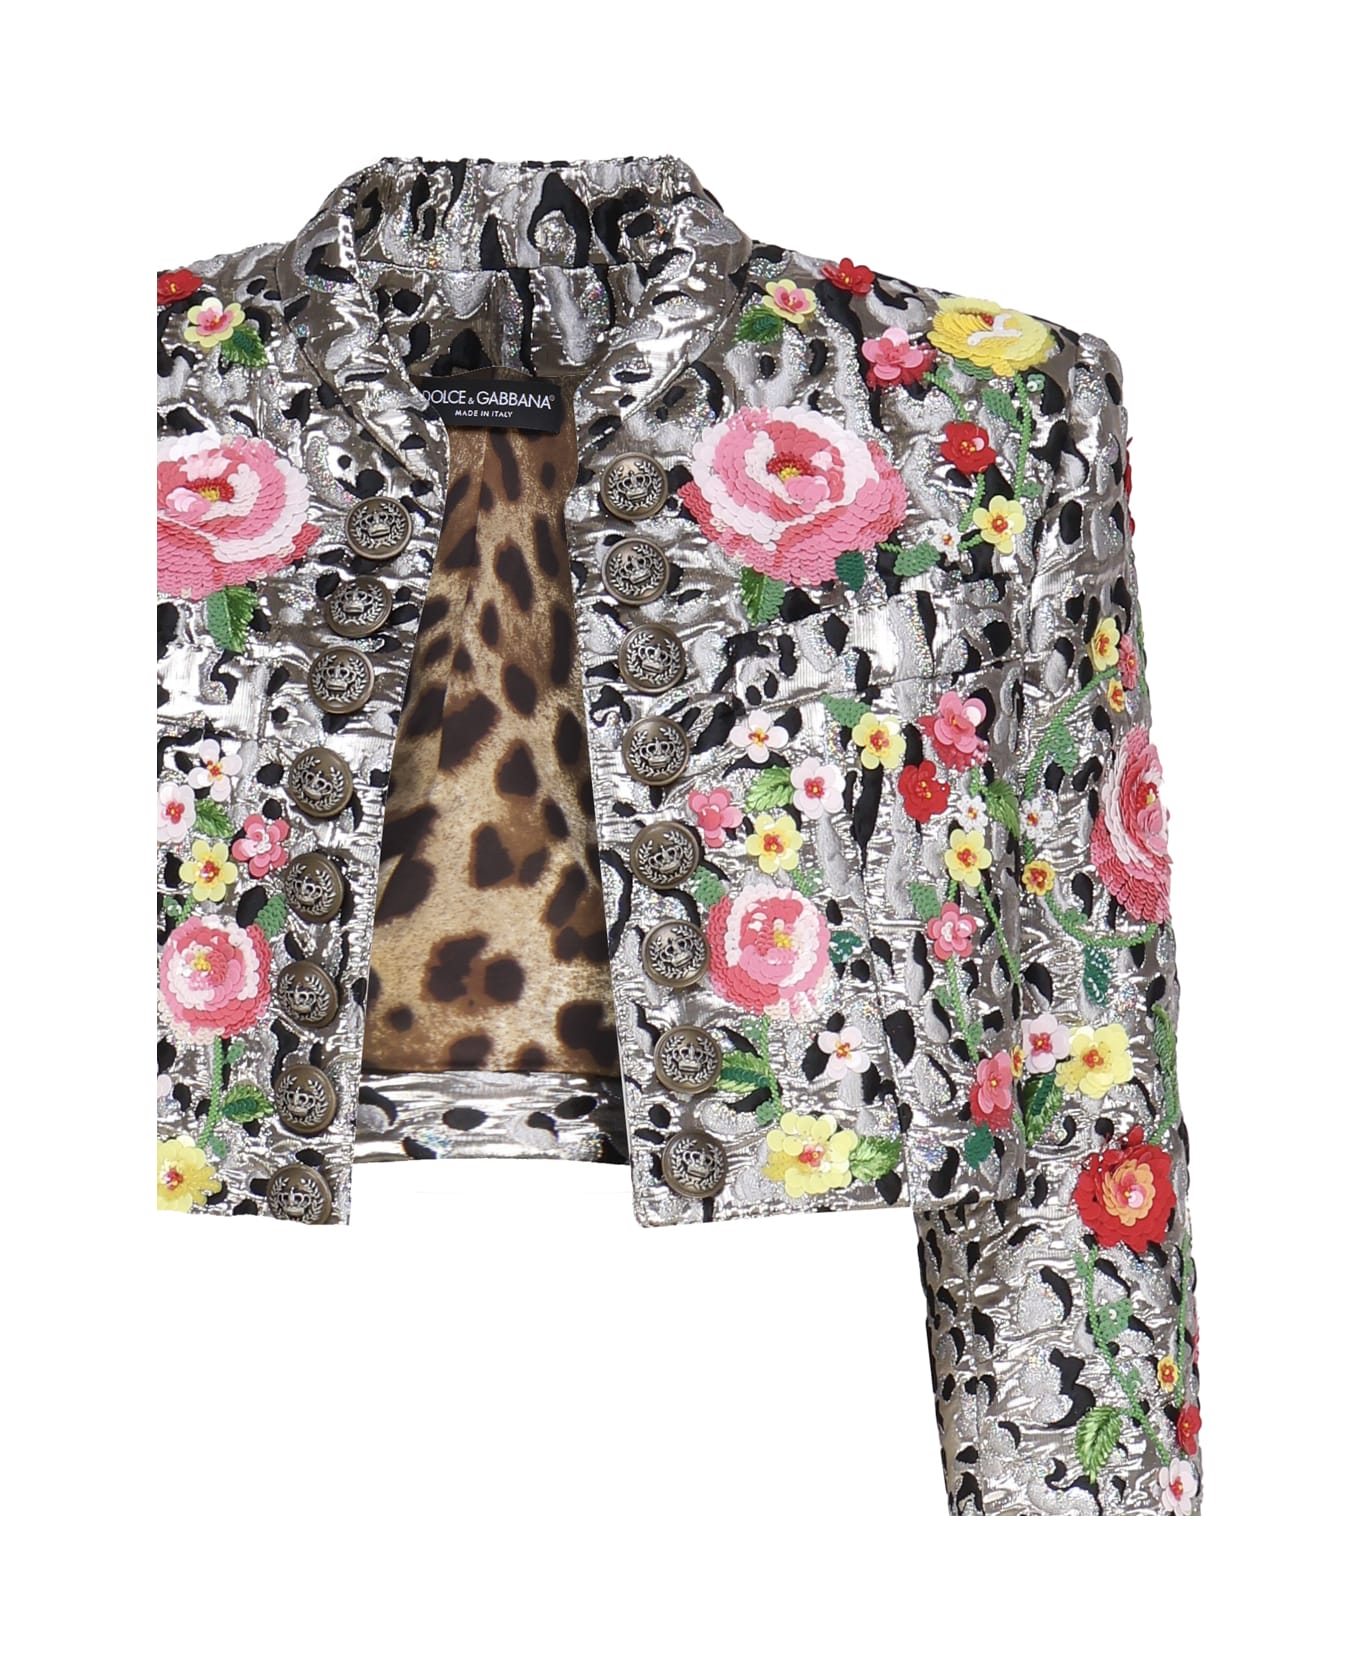 Dolce & Gabbana Jacket With Animal Print And Flowers - Multicolor